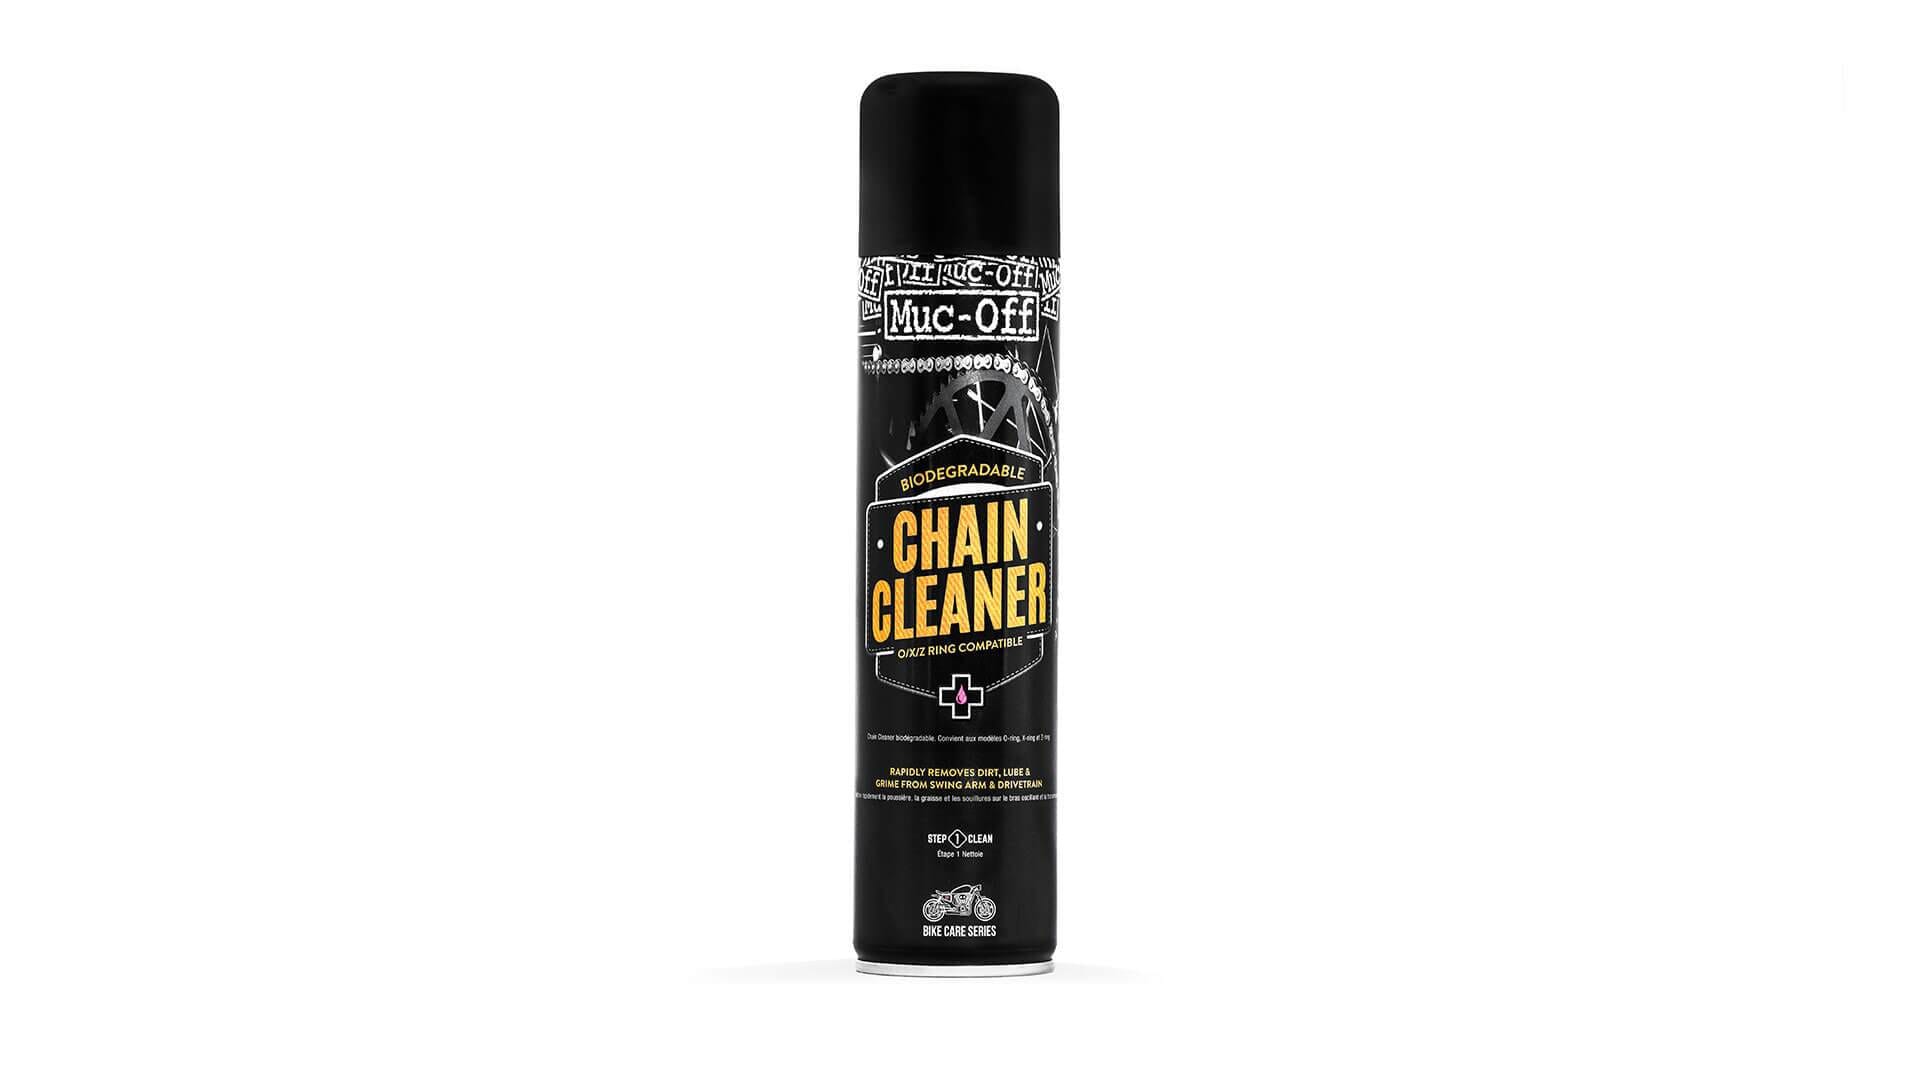 Muc-Off Motorcycle Chain cleaner 400ml